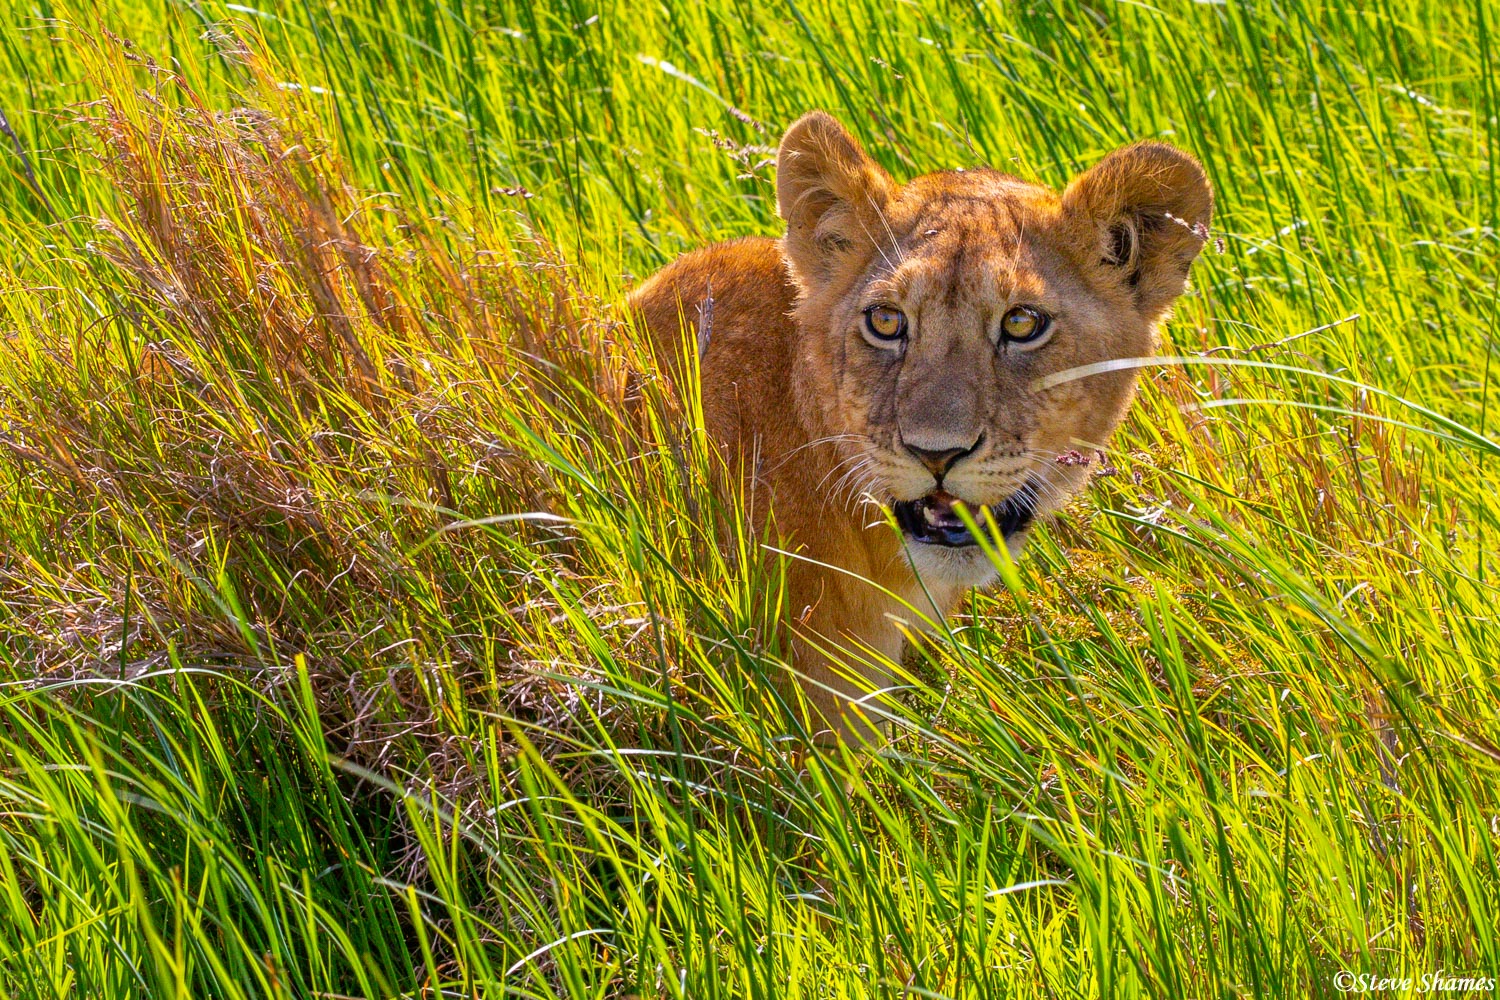 I like the looks of this lion cub in the bright green grass.